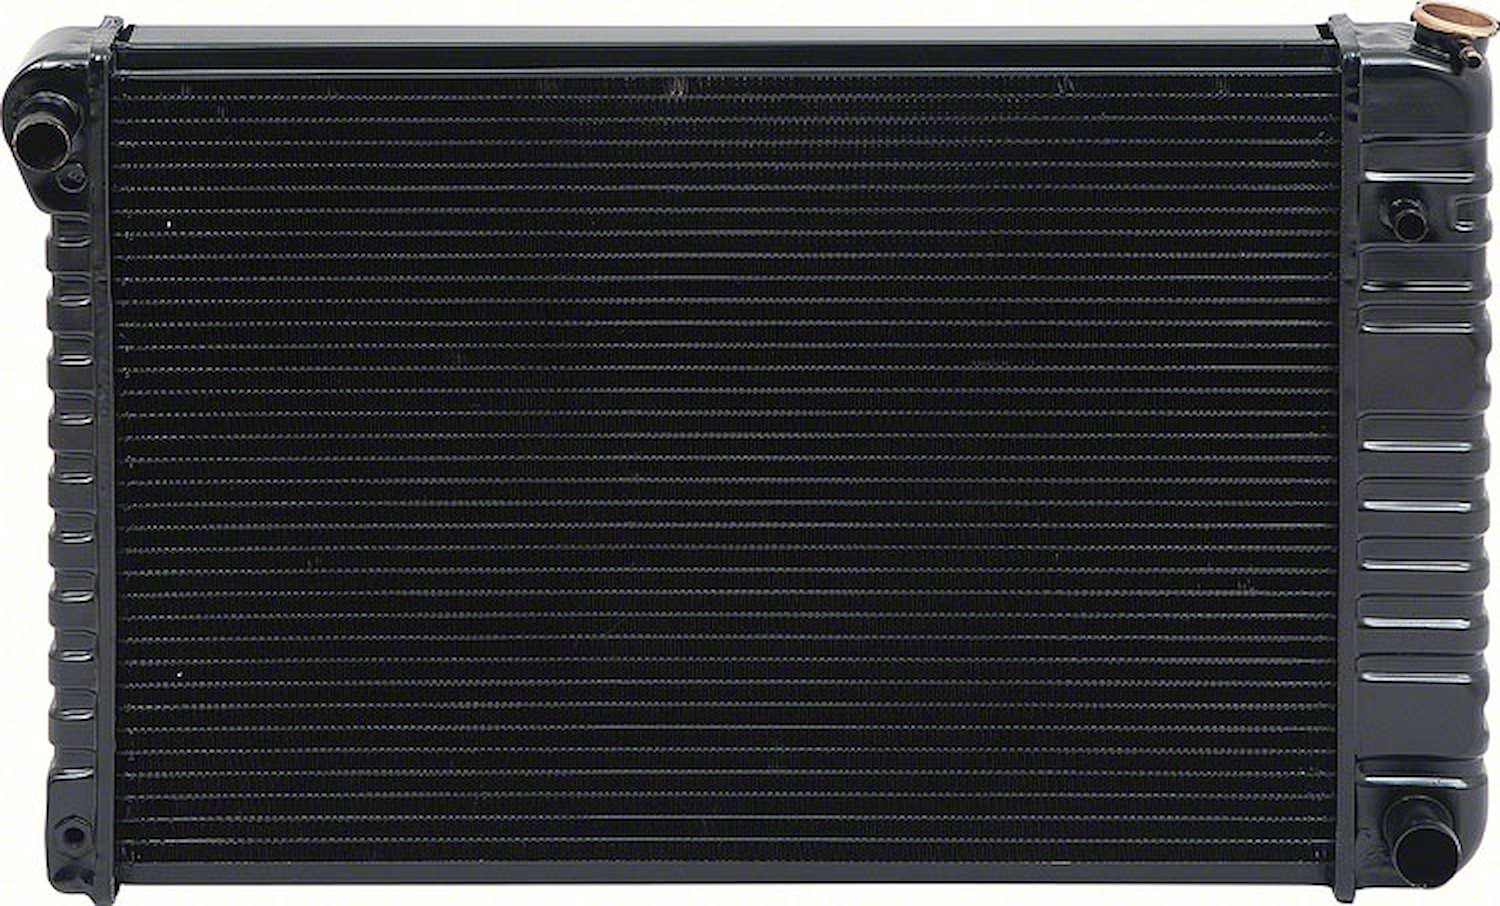 CRD1786S Radiator 1978-80 Chevrolet Truck V8 With MT 3 Row Copper/Brass (19-1/2" x 28-3/8" x 2" Core)